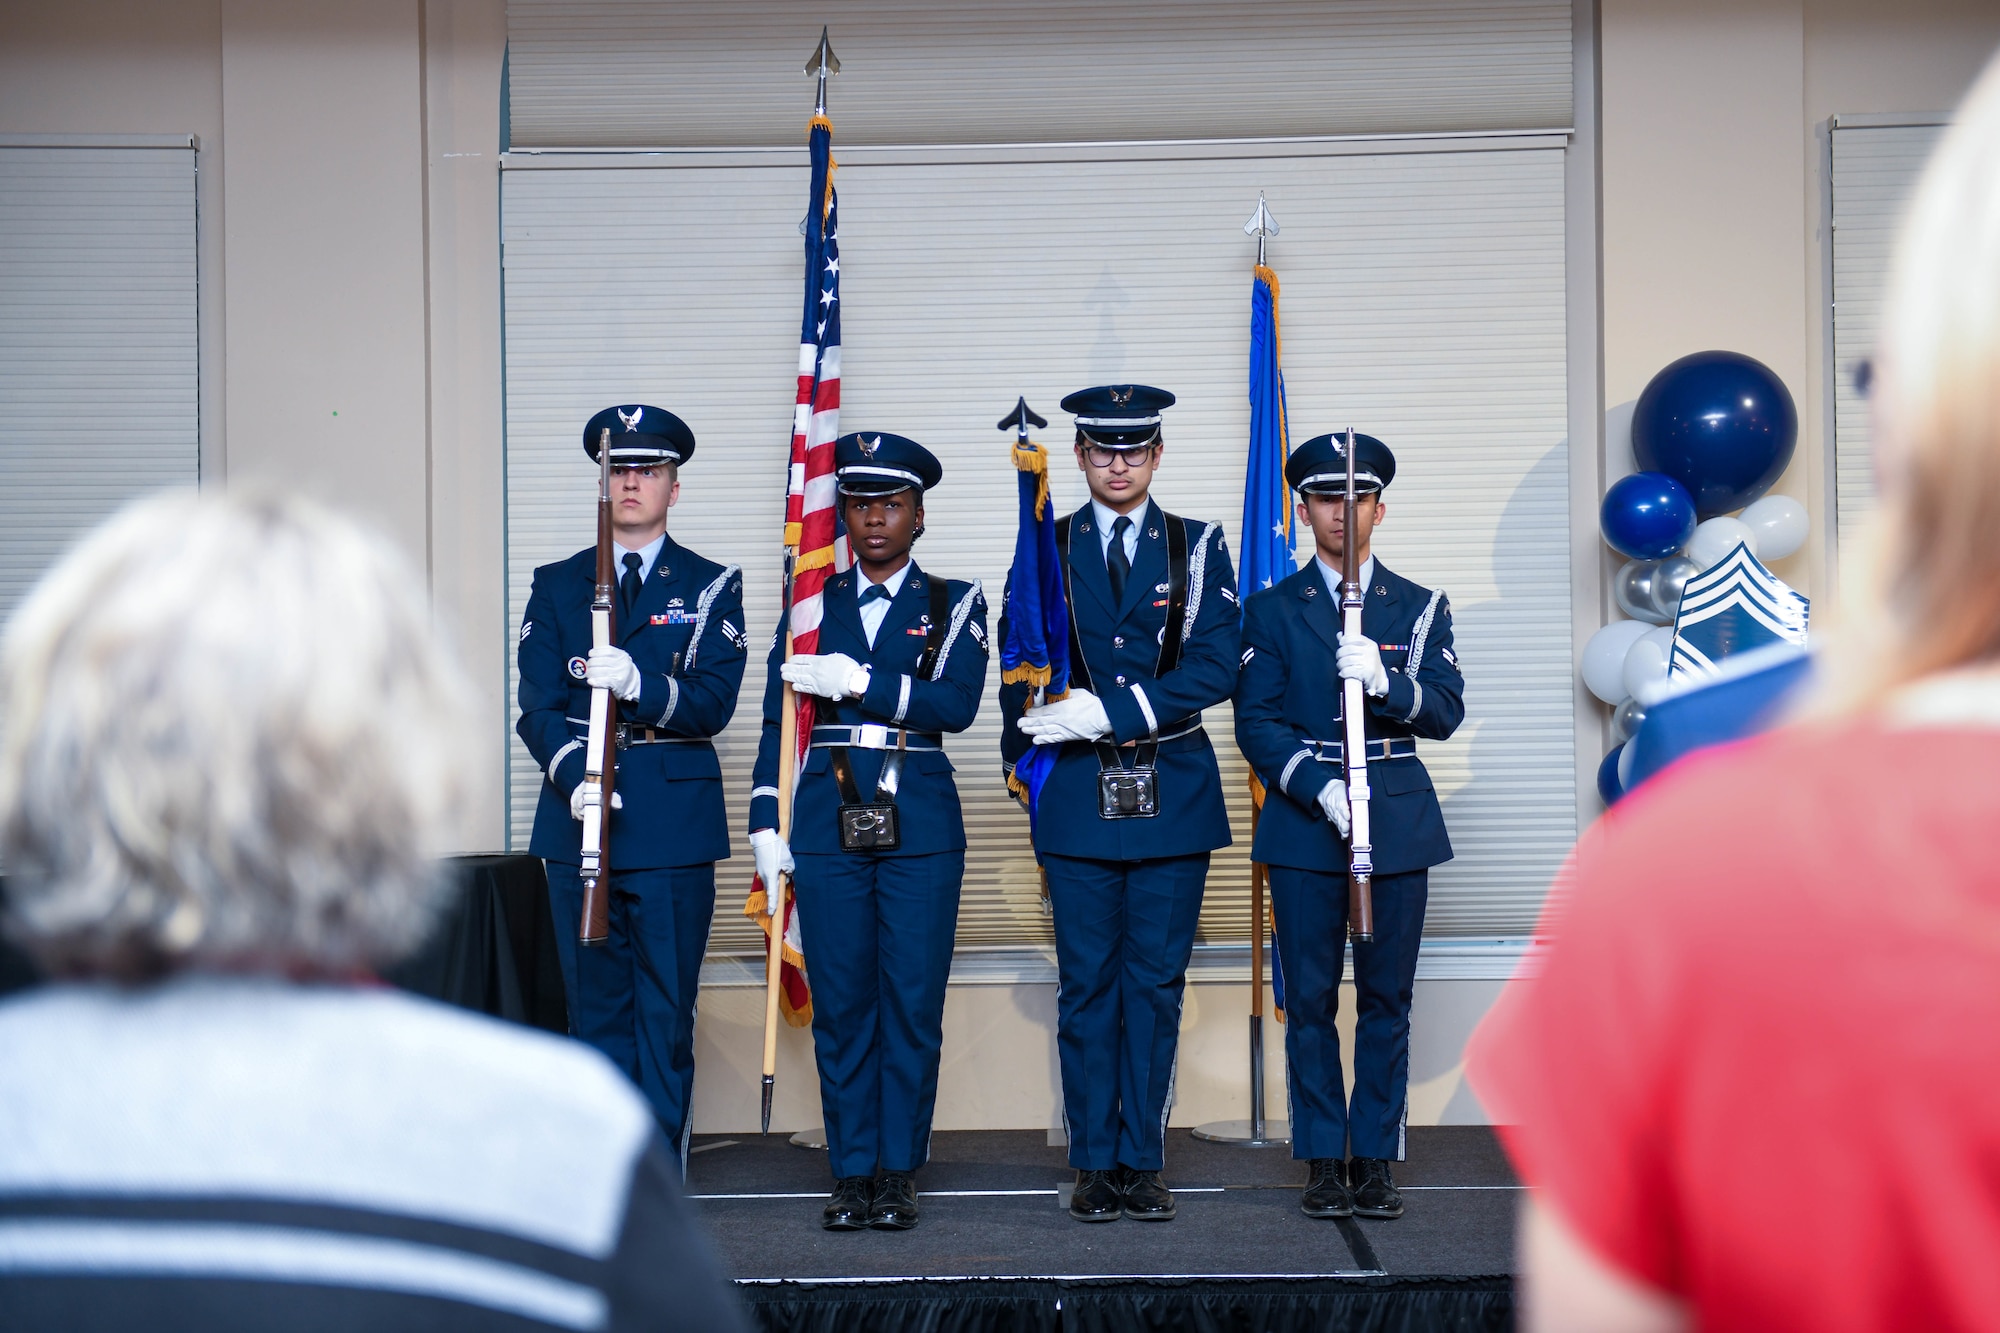 U.S. Air Force Base Honor Guardsmen post the colors during a chief master sergeant recognition ceremony at Seymour Johnson Air Force Base, North Carolina, March 2, 2024. Base Honor Guardsmen practice flag folding, rifle holding and military bearing to execute various military ceremonies. (U.S. Air Force photo by Senior Airman Taylor Hunter)